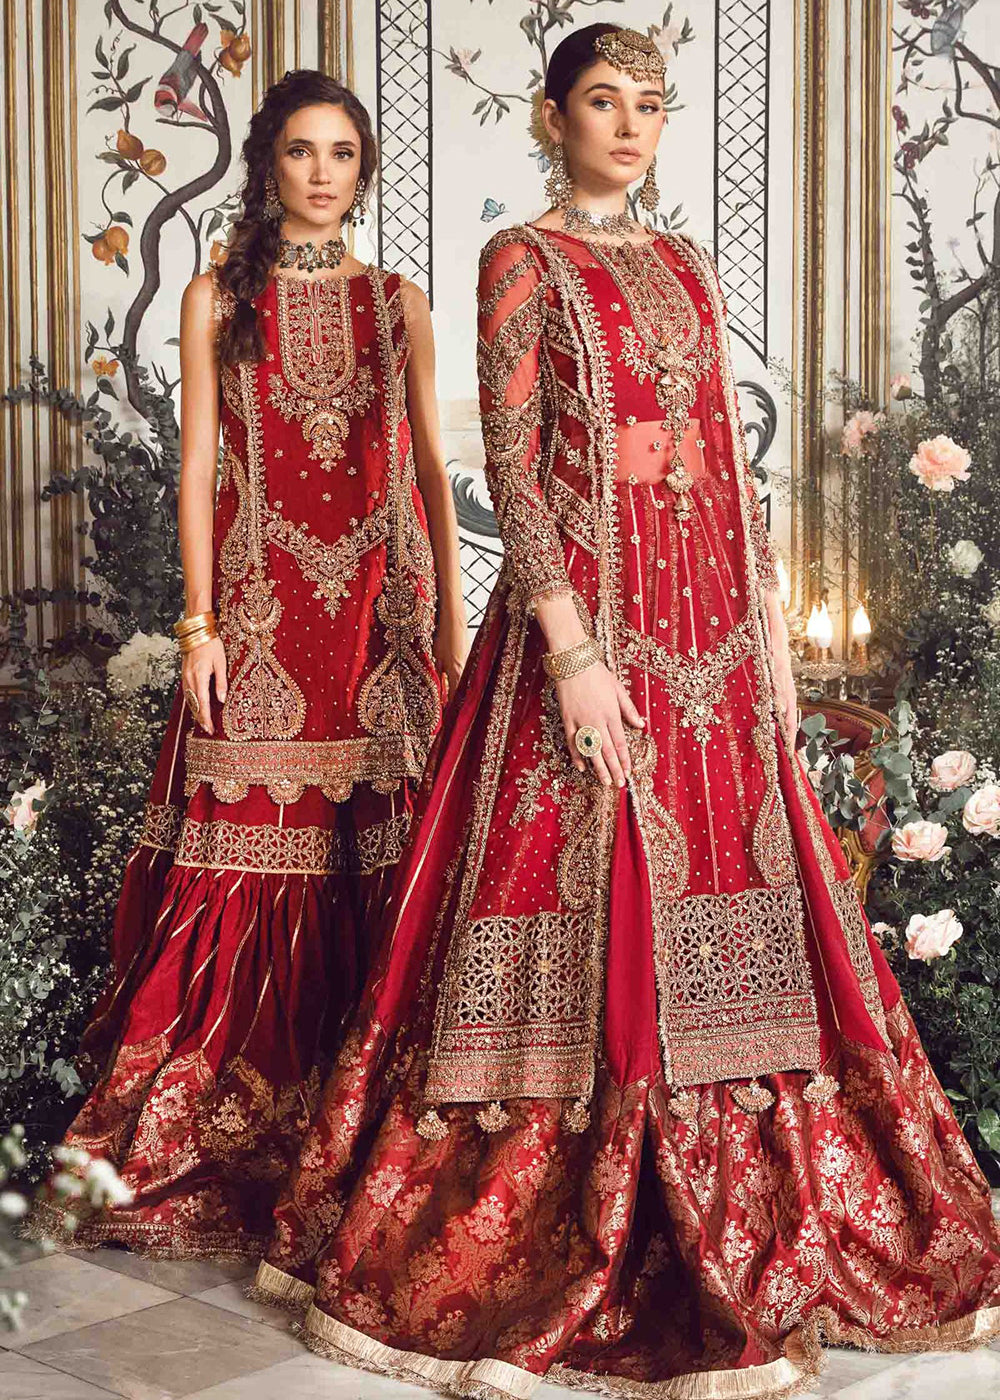 Buy Now Mbroidered Wedding 2023 by Maria B | Maroon BD-2708 Online in USA, UK, Canada & Worldwide at Empress Clothing.